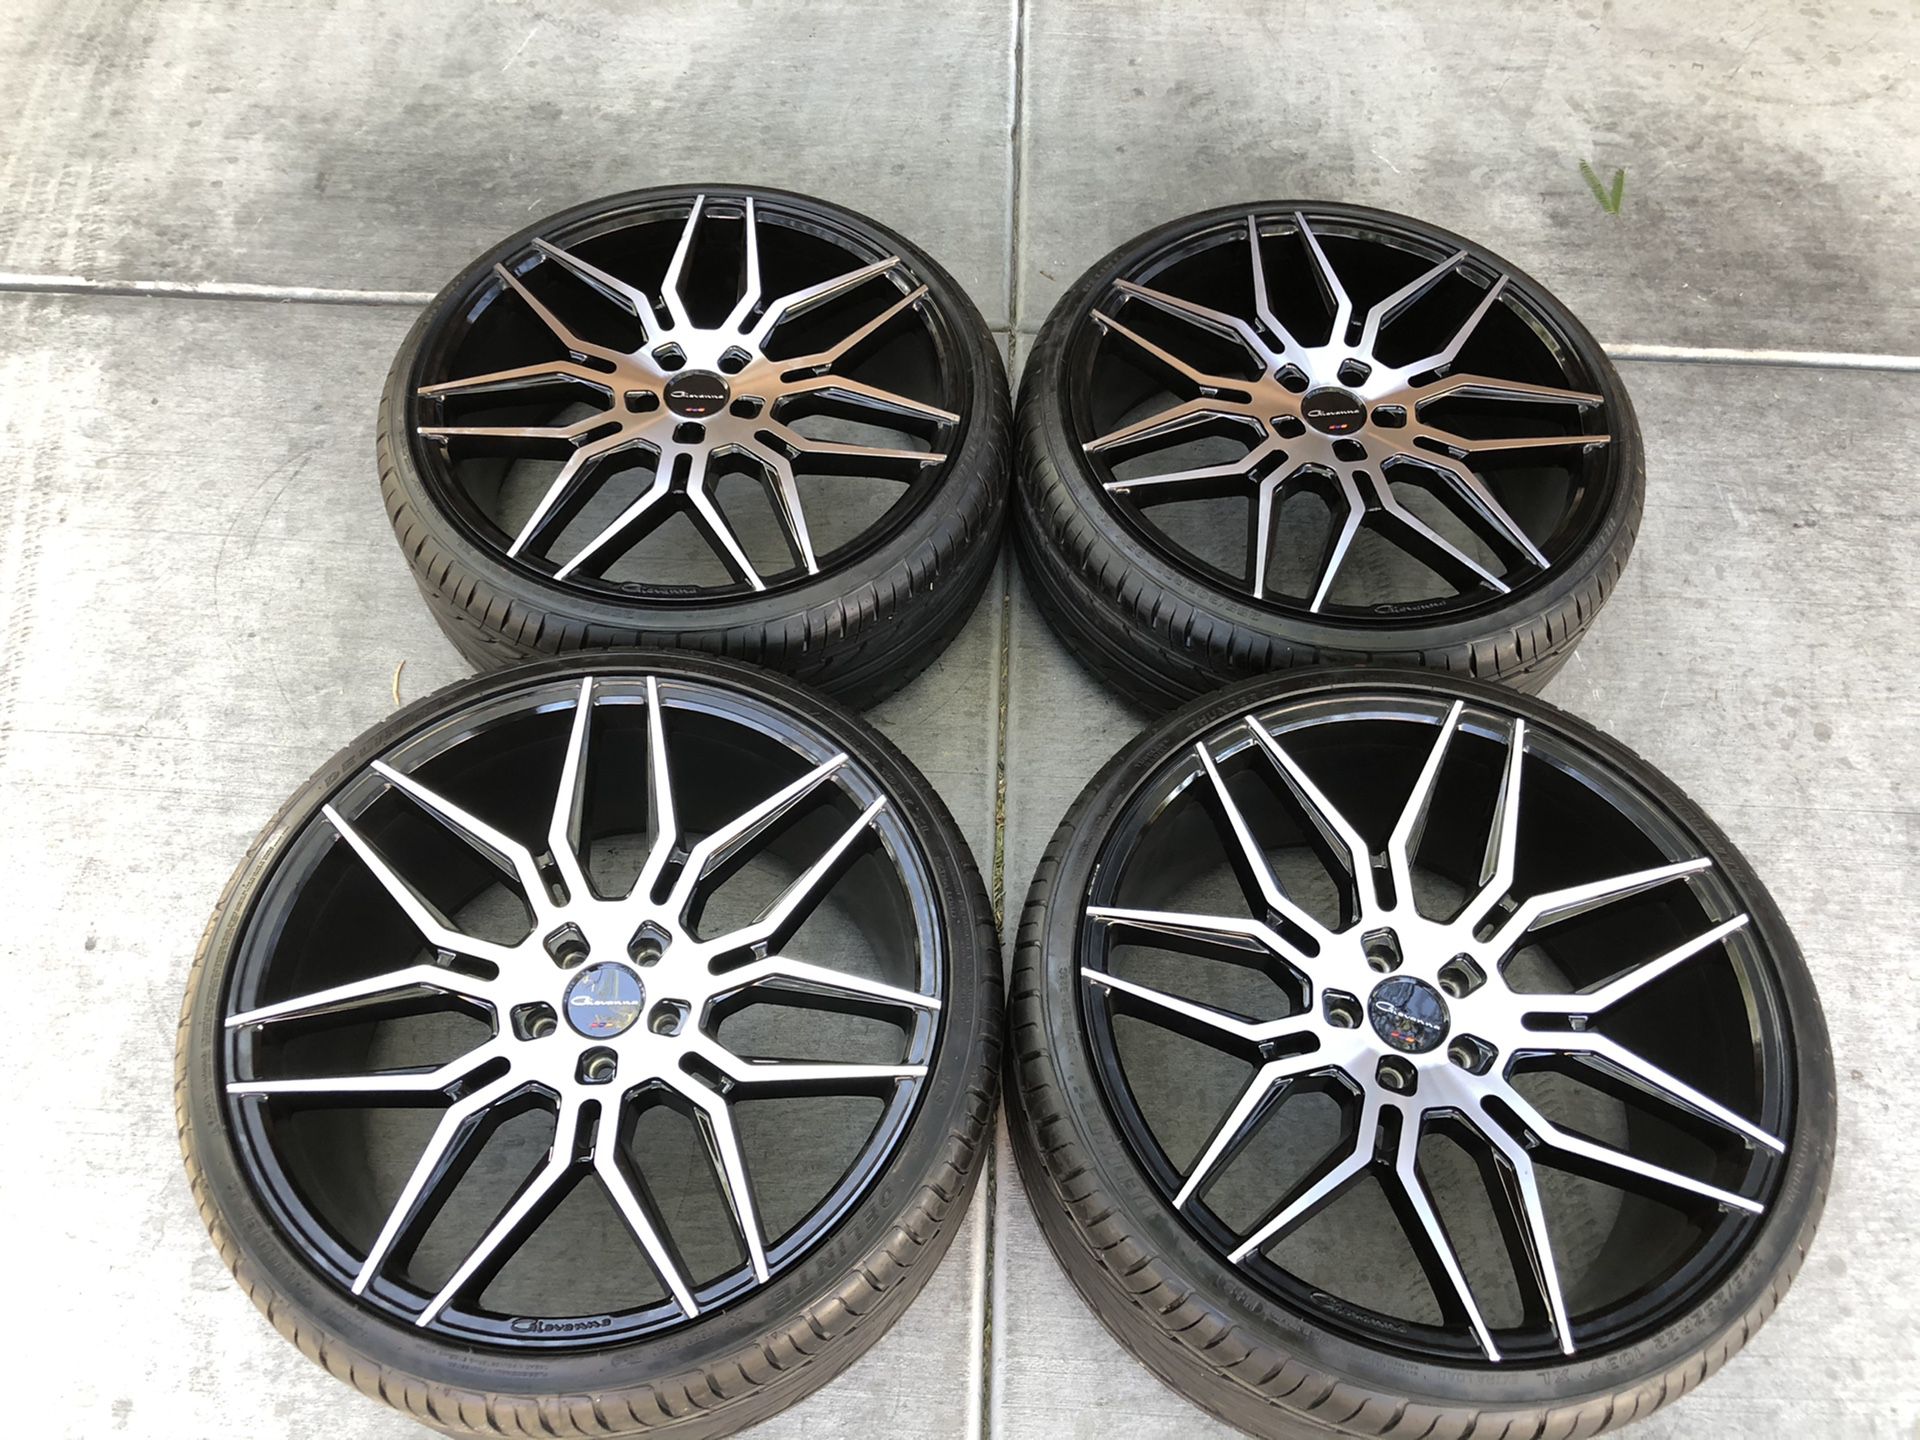 22” Mercedes E class S class s550 AMG Audi 22” 5x112 staggered Giovanna Black Custom 22” wheels and tires. Will fit any Mercedes or Audi